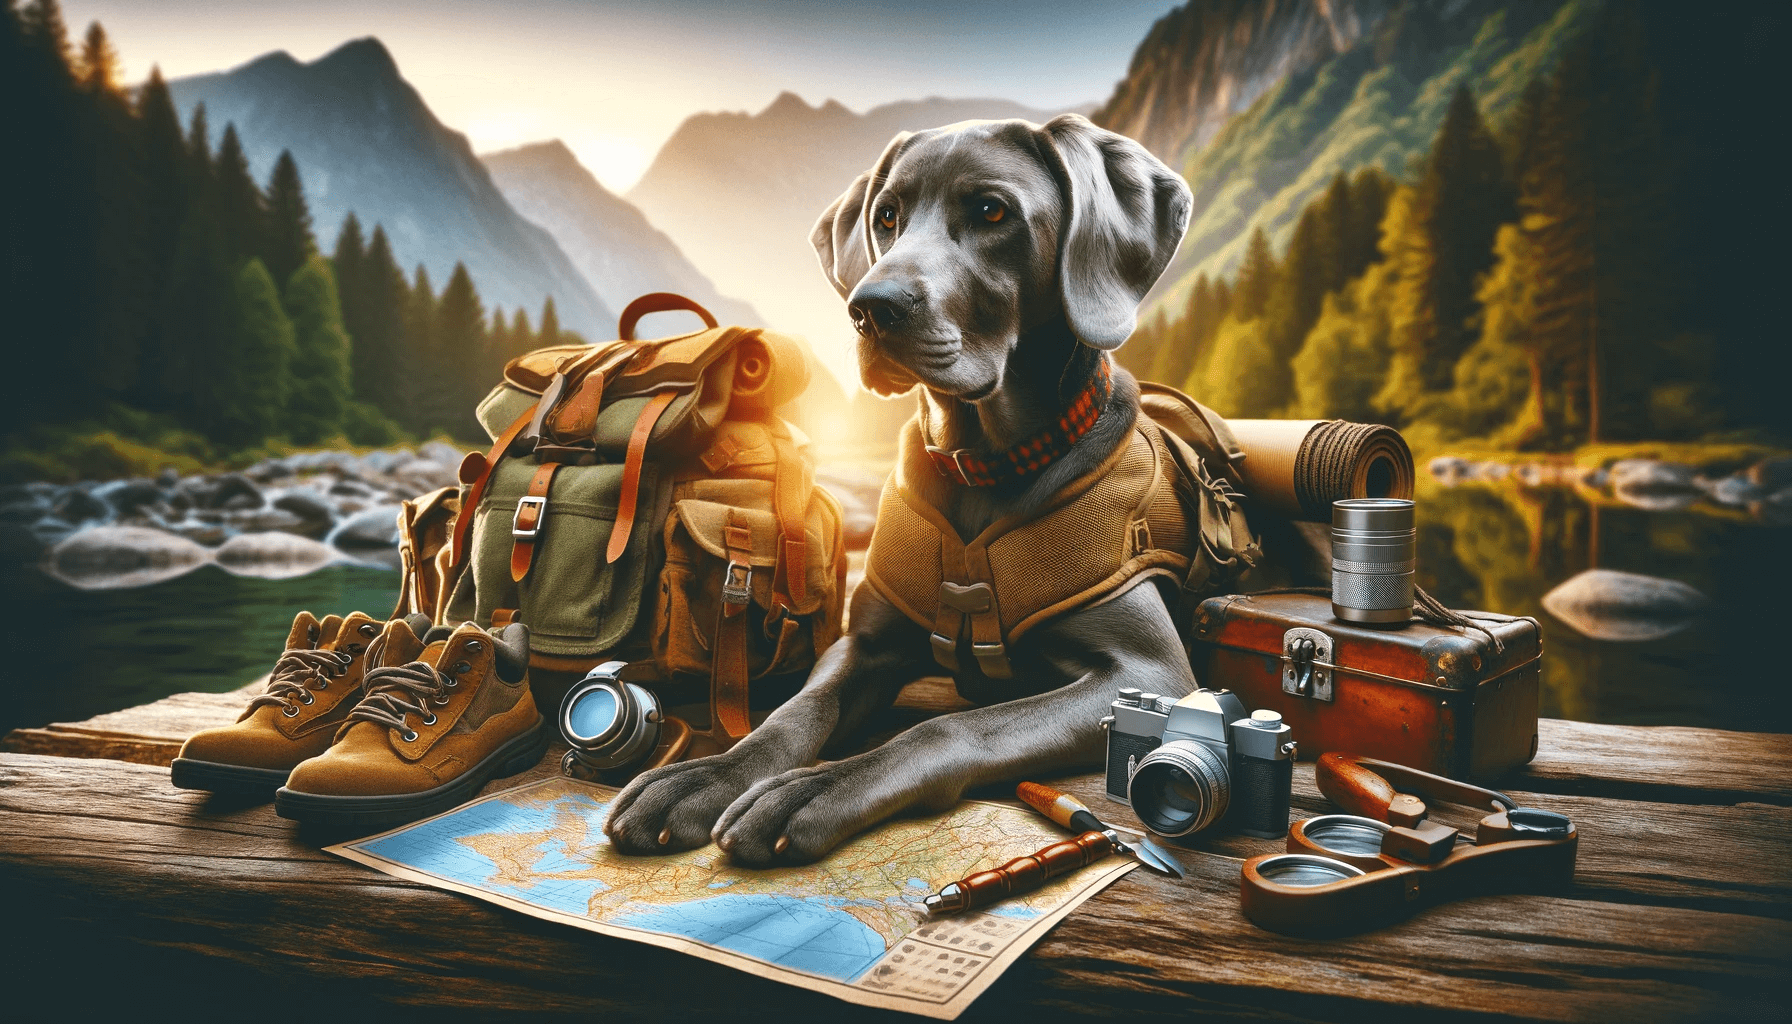 Greyador_s_sense_of_adventure_ready_for_outdoor_escapades_depicted_in_an_exciting_scene_of_exploration_and_discovery